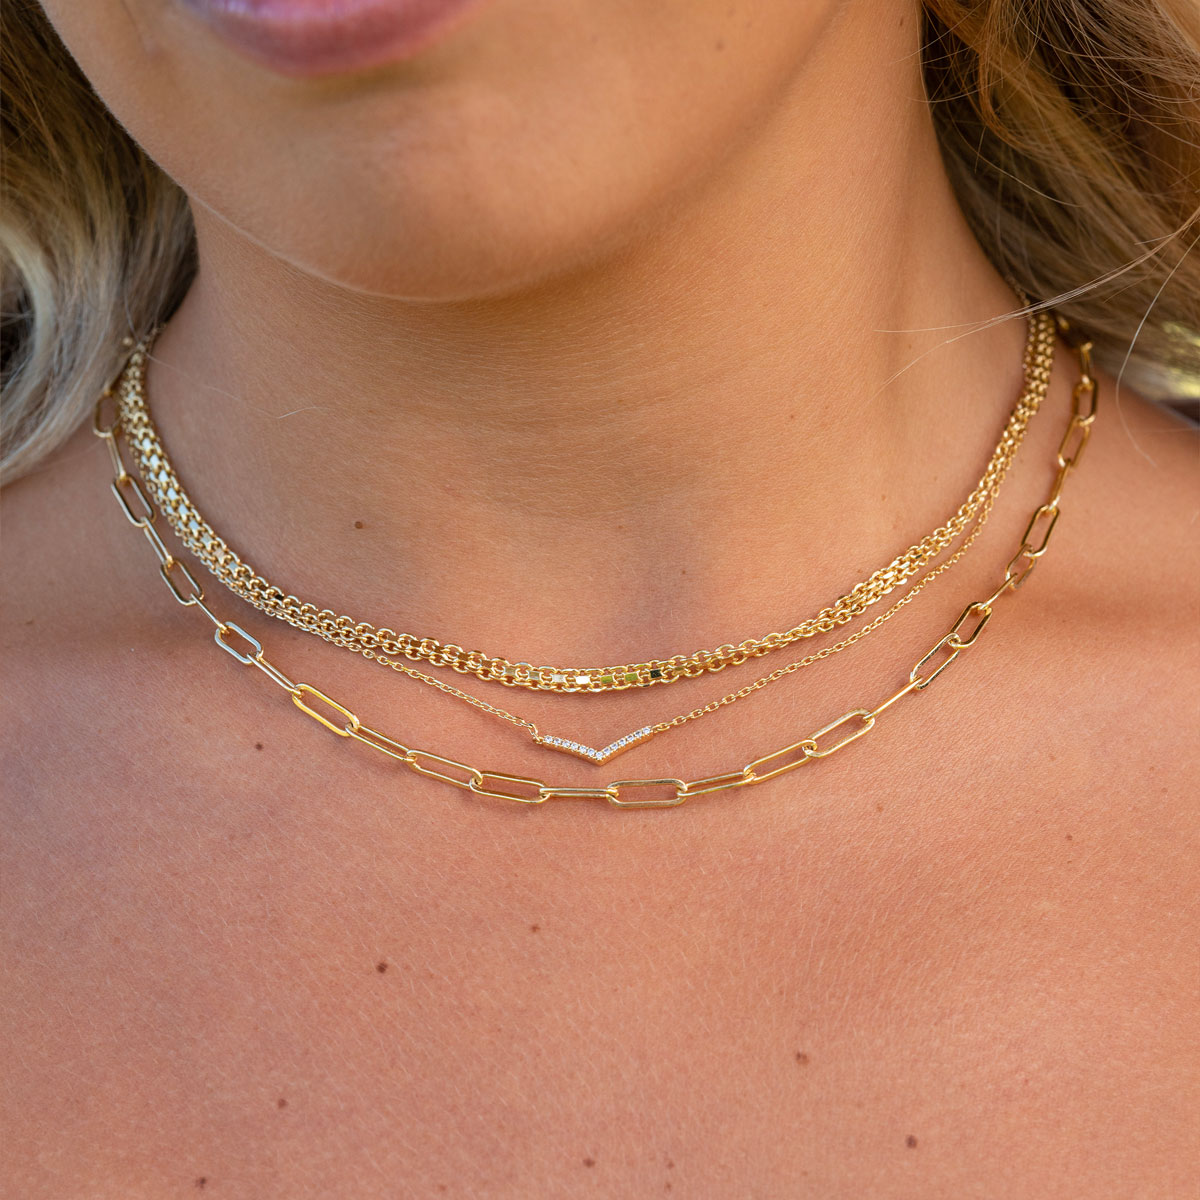 Unique layered gold chain necklaces on model